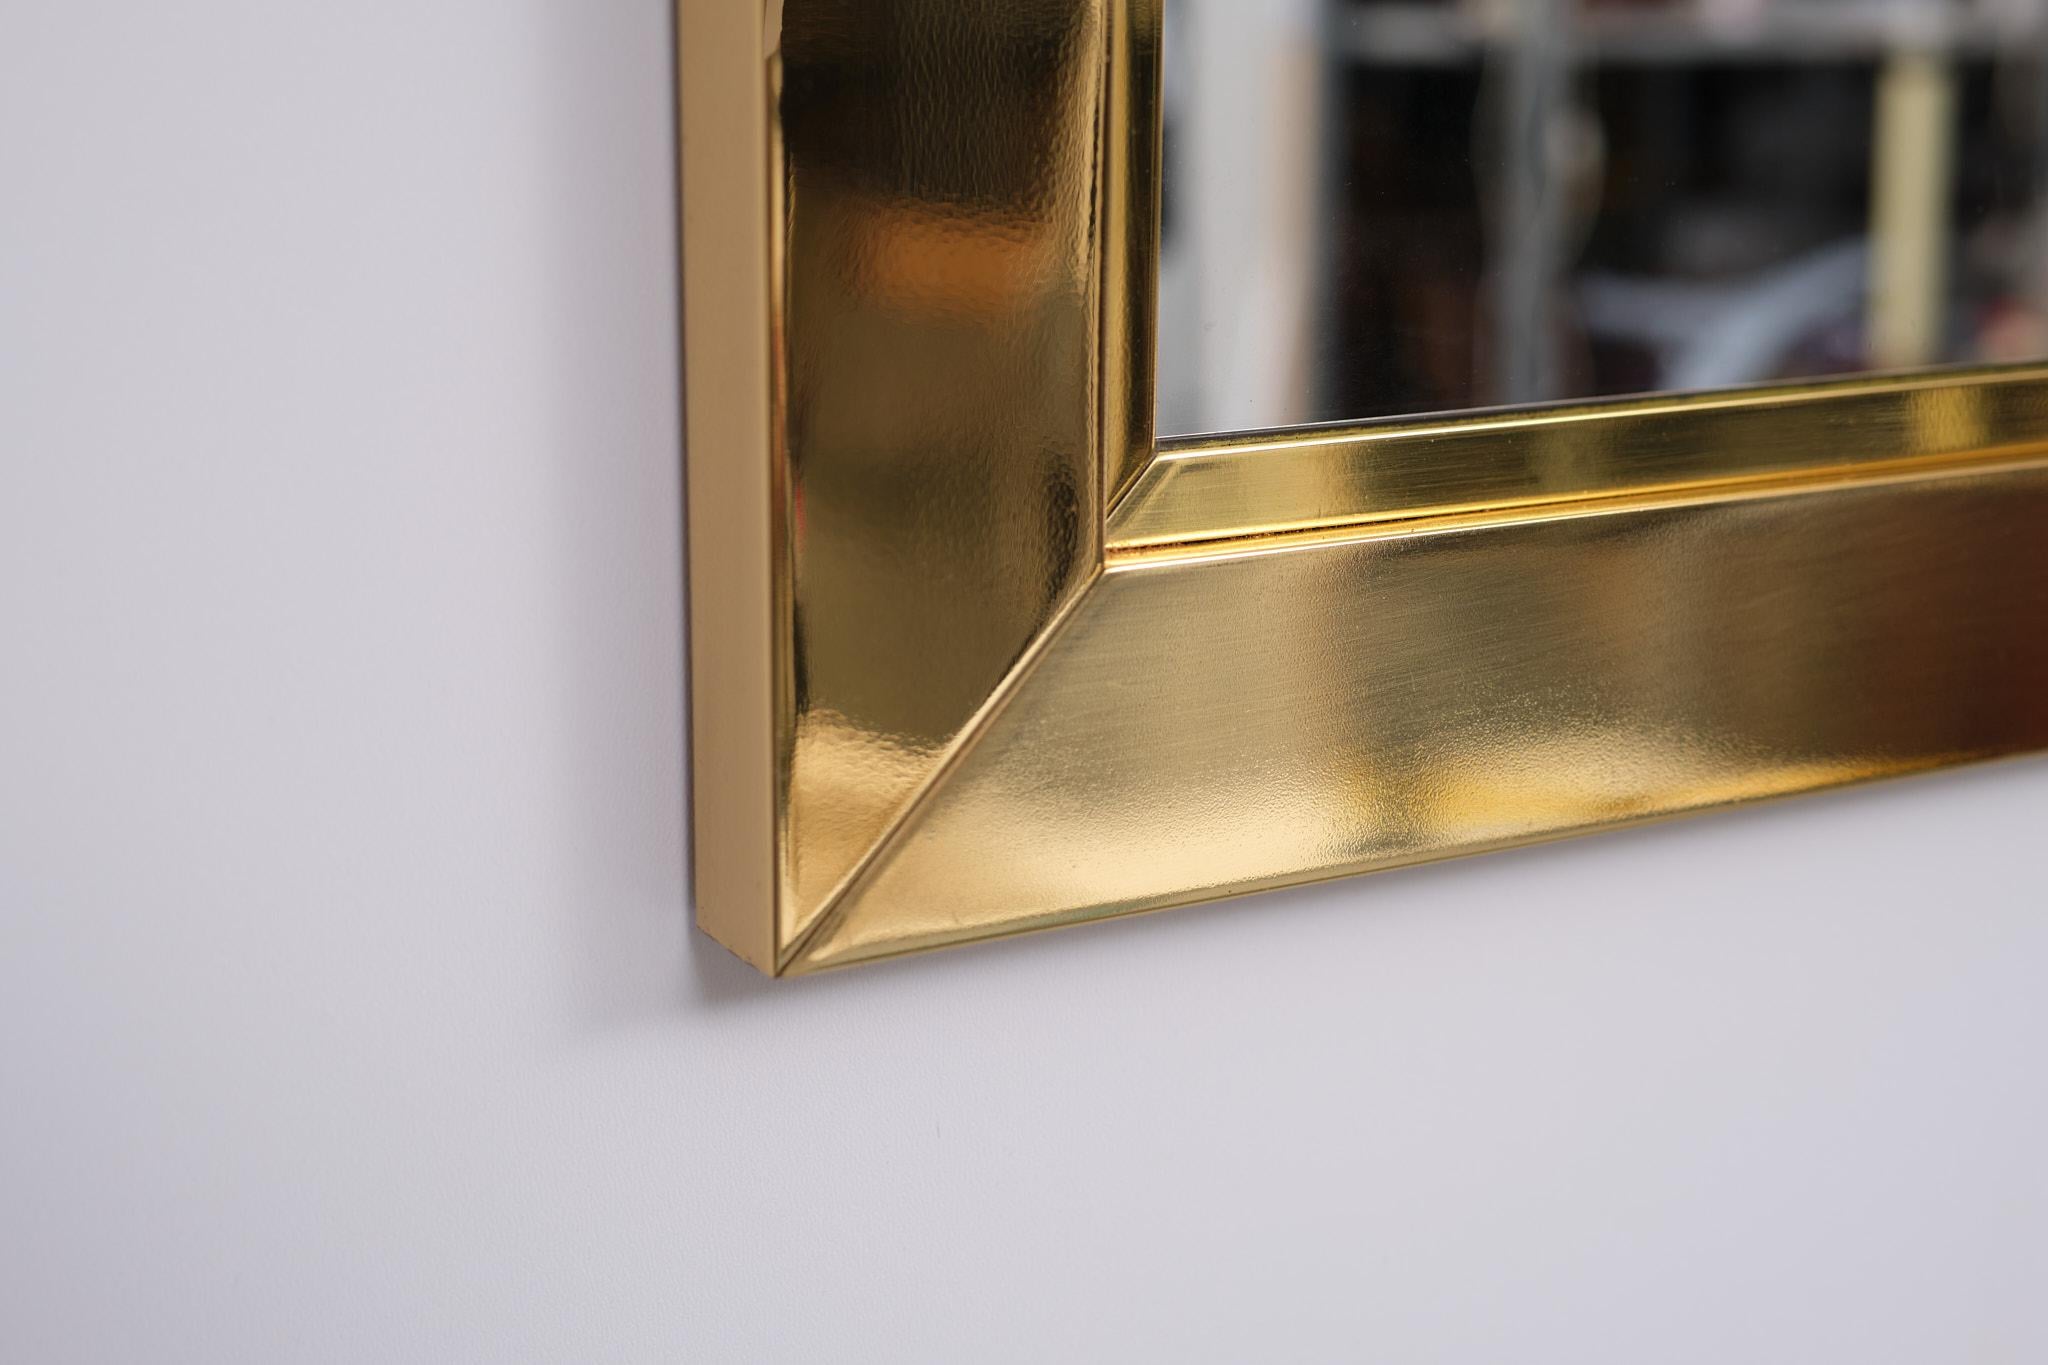 Late 20th Century Brass Mirror Attributed to Willy Rizzo 1970 Italy For Sale